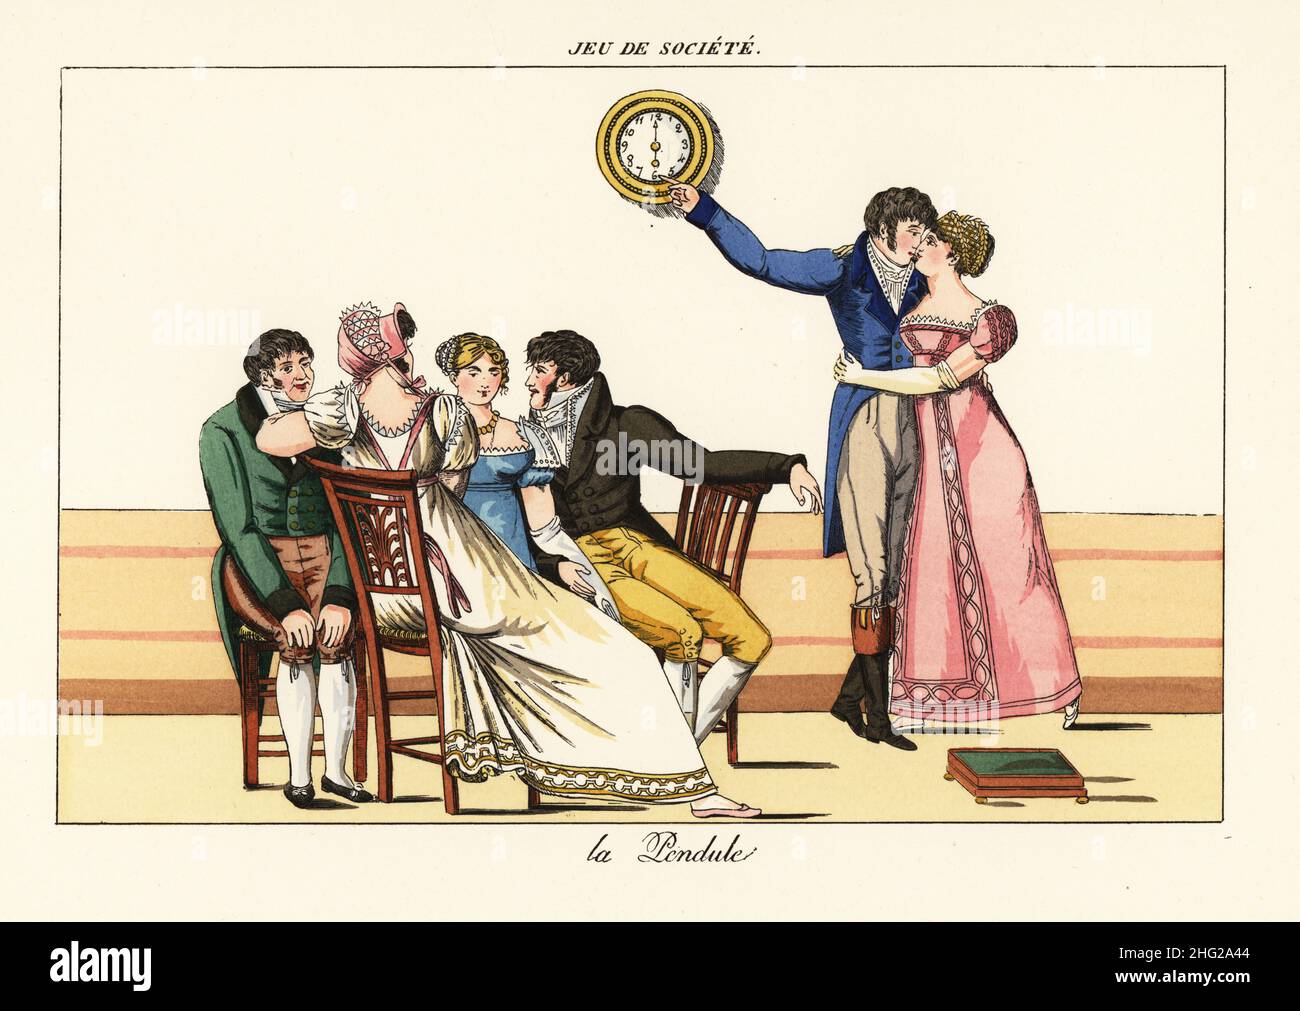 Gentlemen and ladies playing the kissing game The Clock. A woman asks the time and is kissed according to the hour on the clock. La Pendule. Handcoloured lithograph from Henry Rene d’Allemagne’s Recreations et Passe-Temps, Games and Pastimes, Hachette, Paris, 1906. Stock Photo